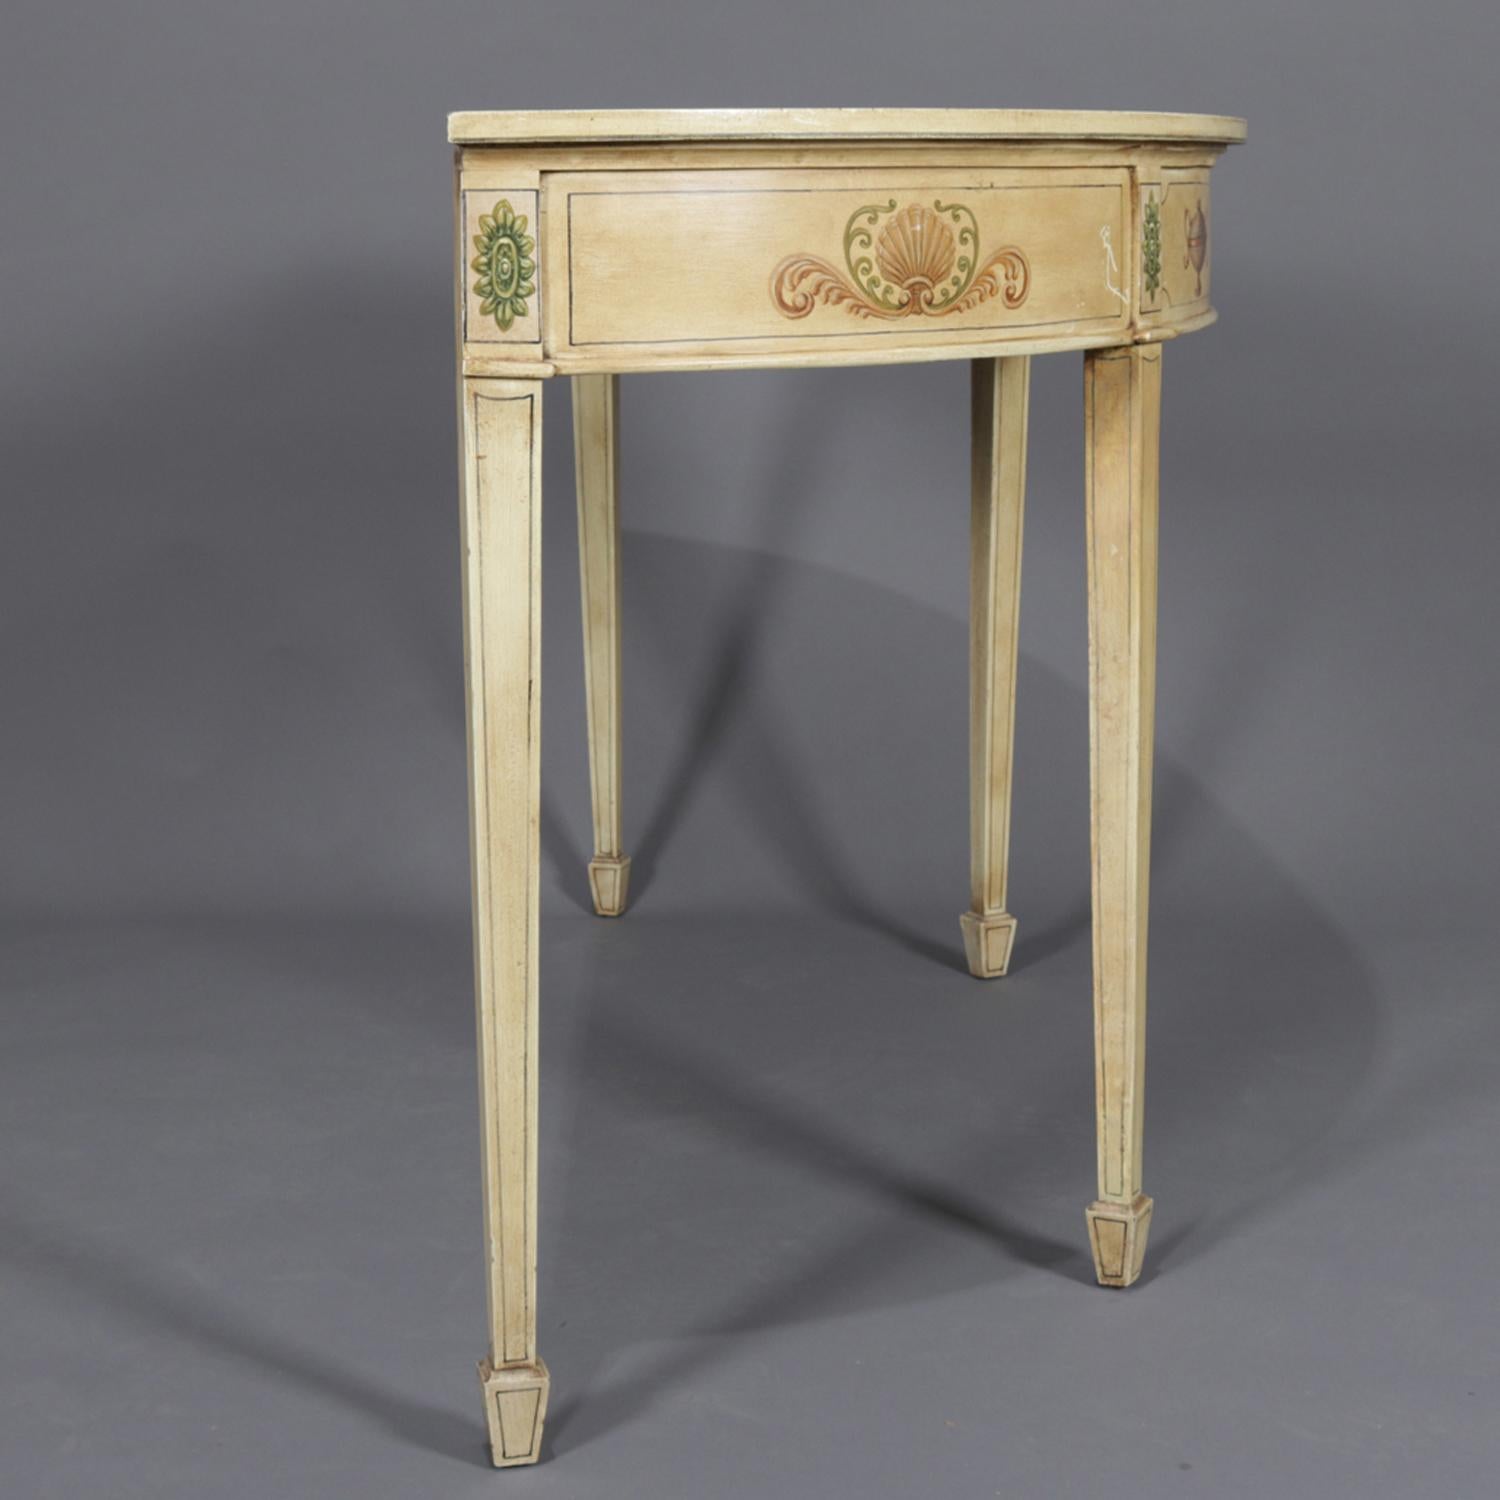 20th Century Vintage French Neoclassical Paint & Gilt Decorated Demilune Console Table